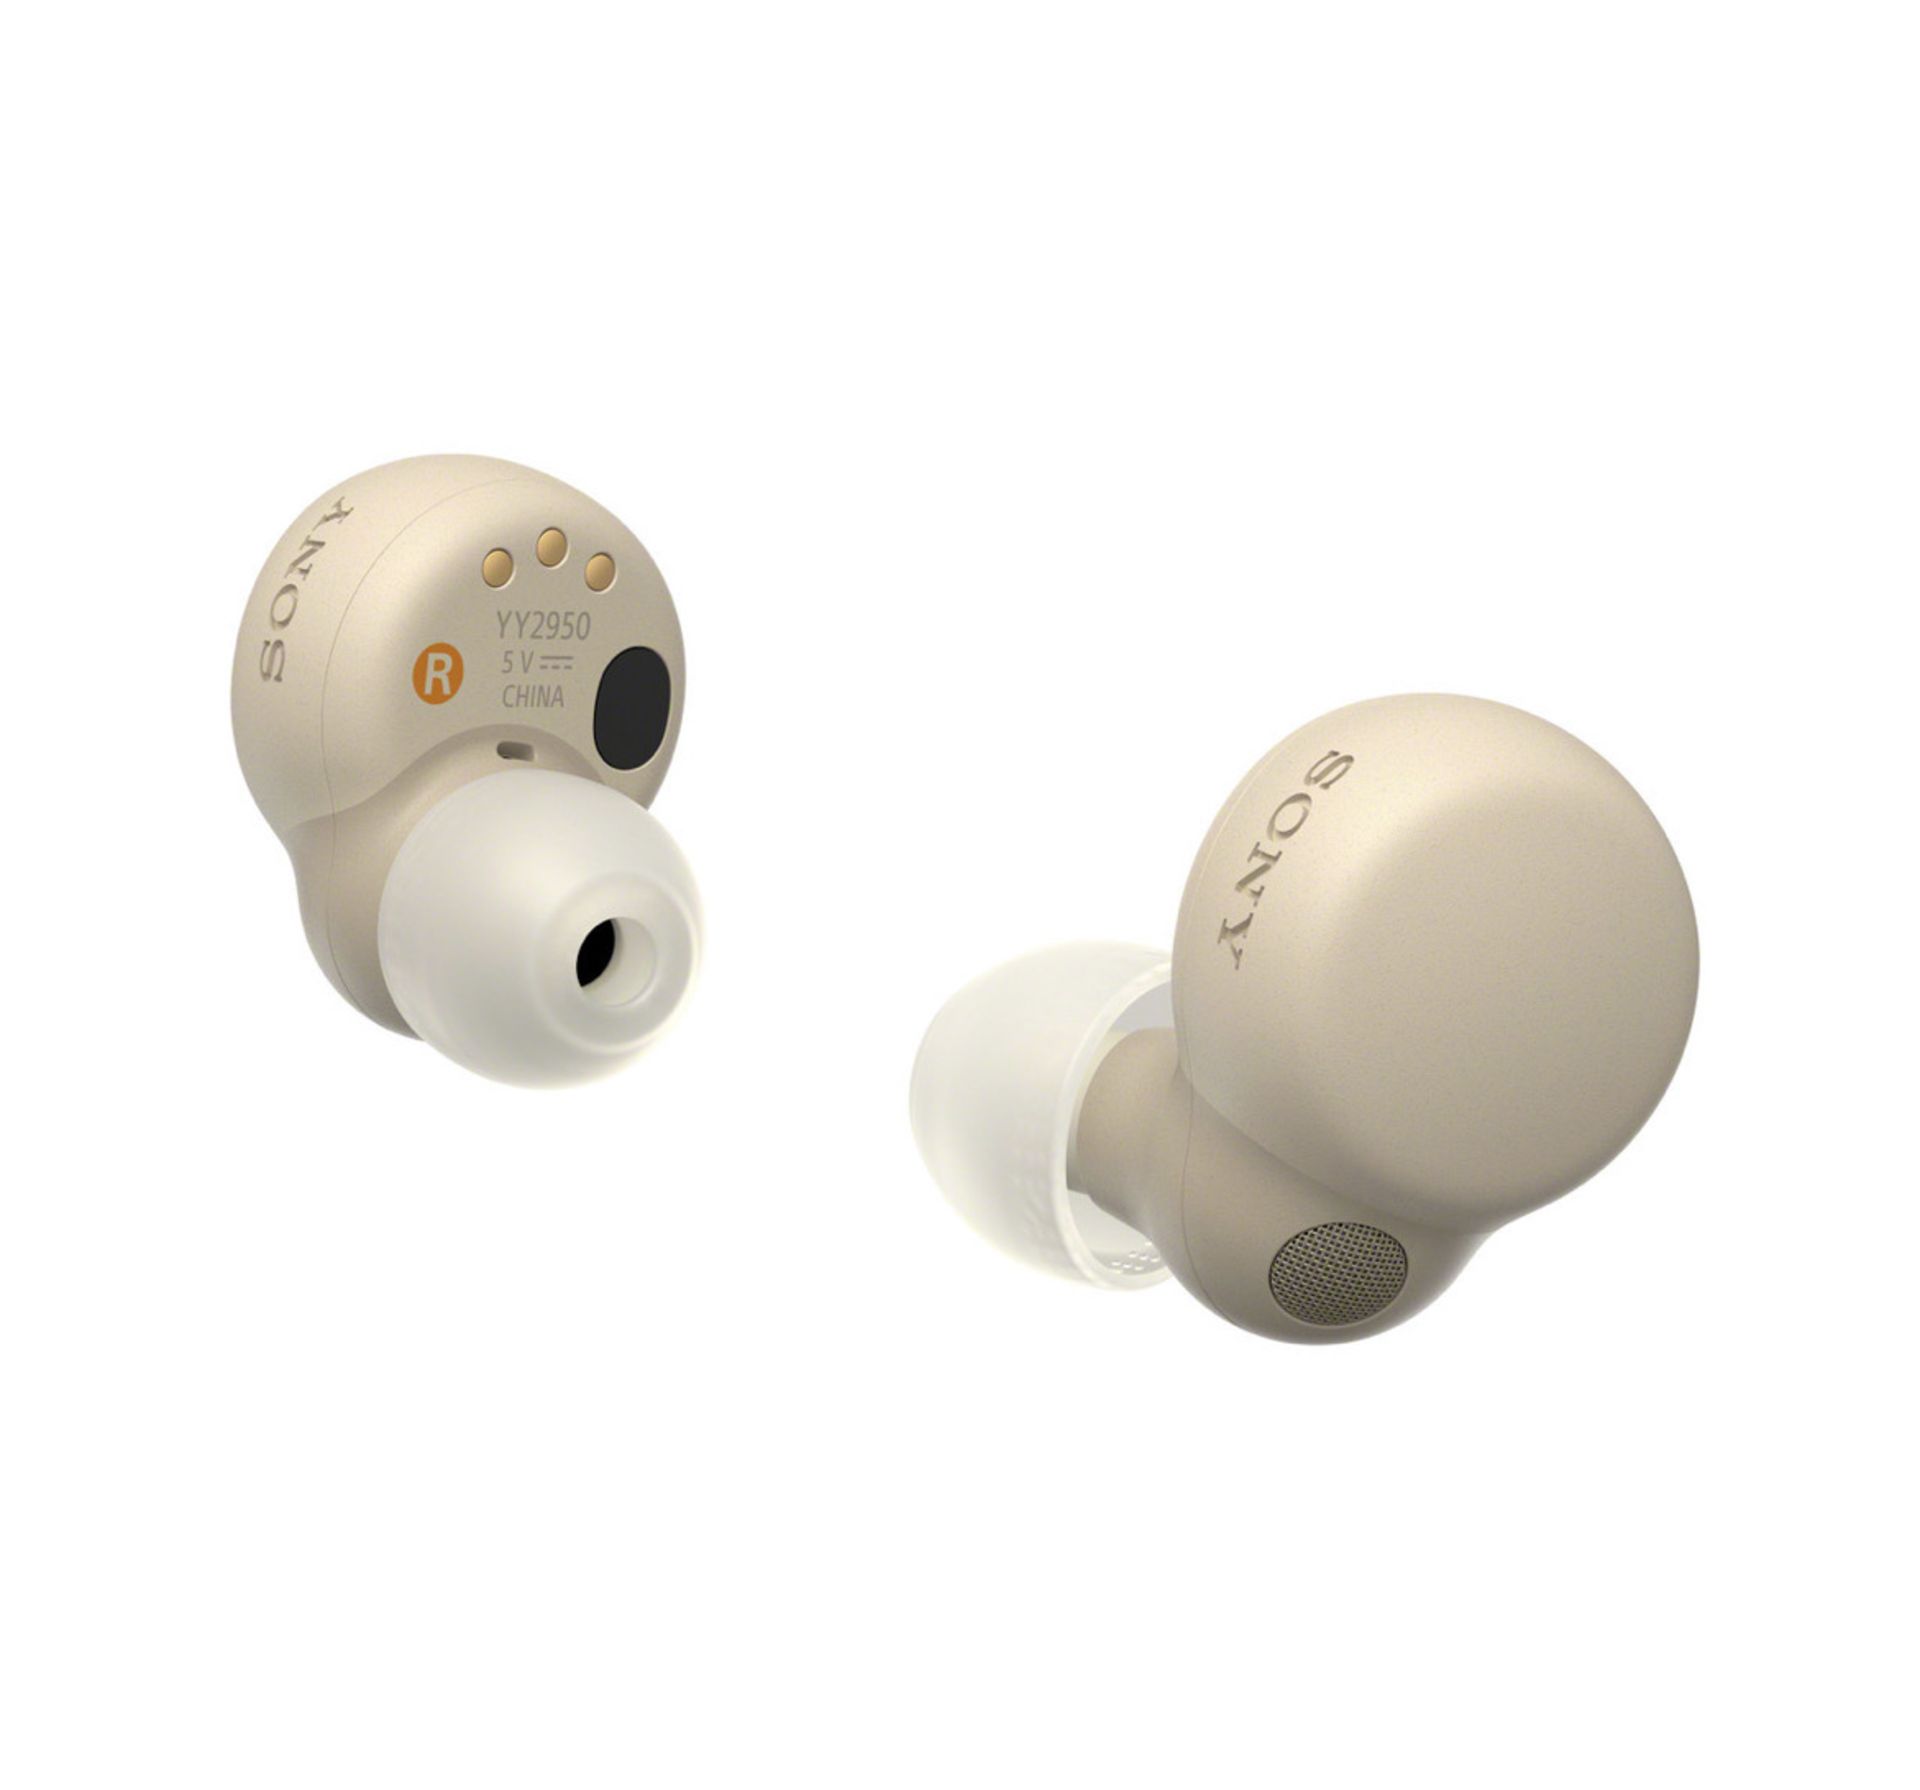 A1 PRODUCT NEW - SONY LINKBUDS S WIRELESS NOISE-CANCELLING, WATER RESISTANT HEADPHONES IN BEIGE - - Bild 5 aus 6